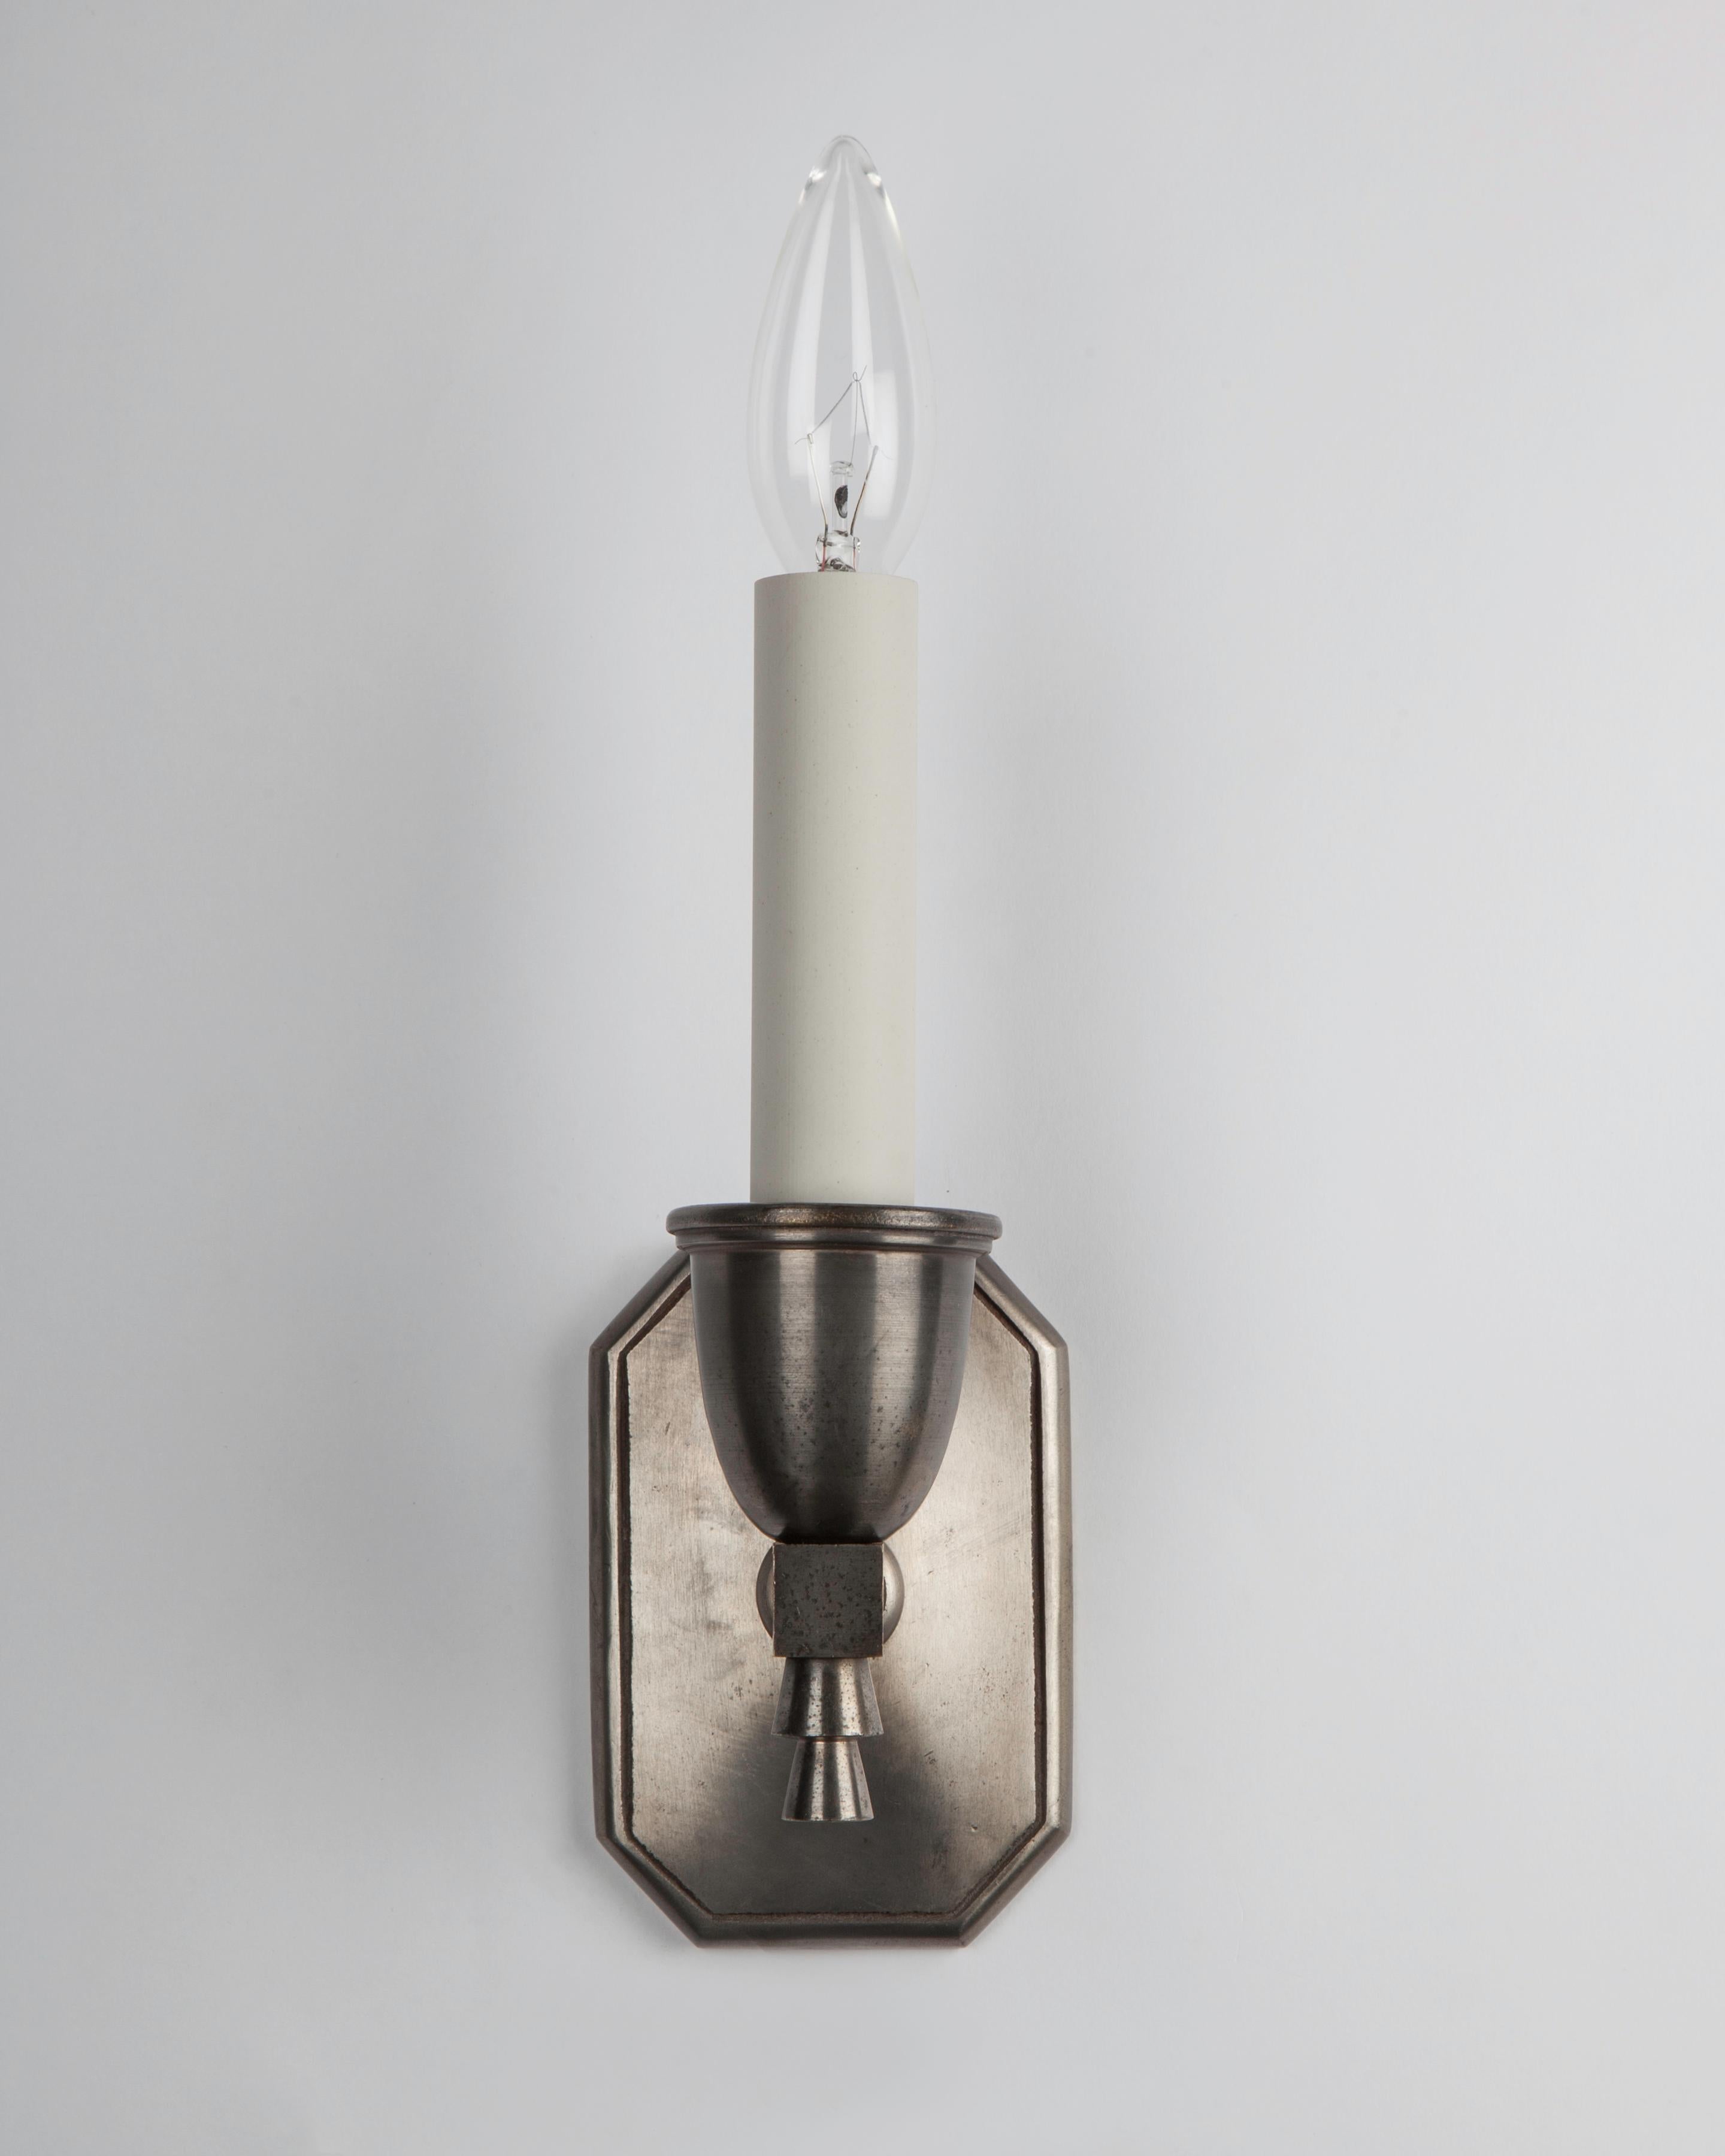 American One Arm Art Deco Sconces by Bradley and Hubbard in Aged Nickel, Circa 1930 For Sale